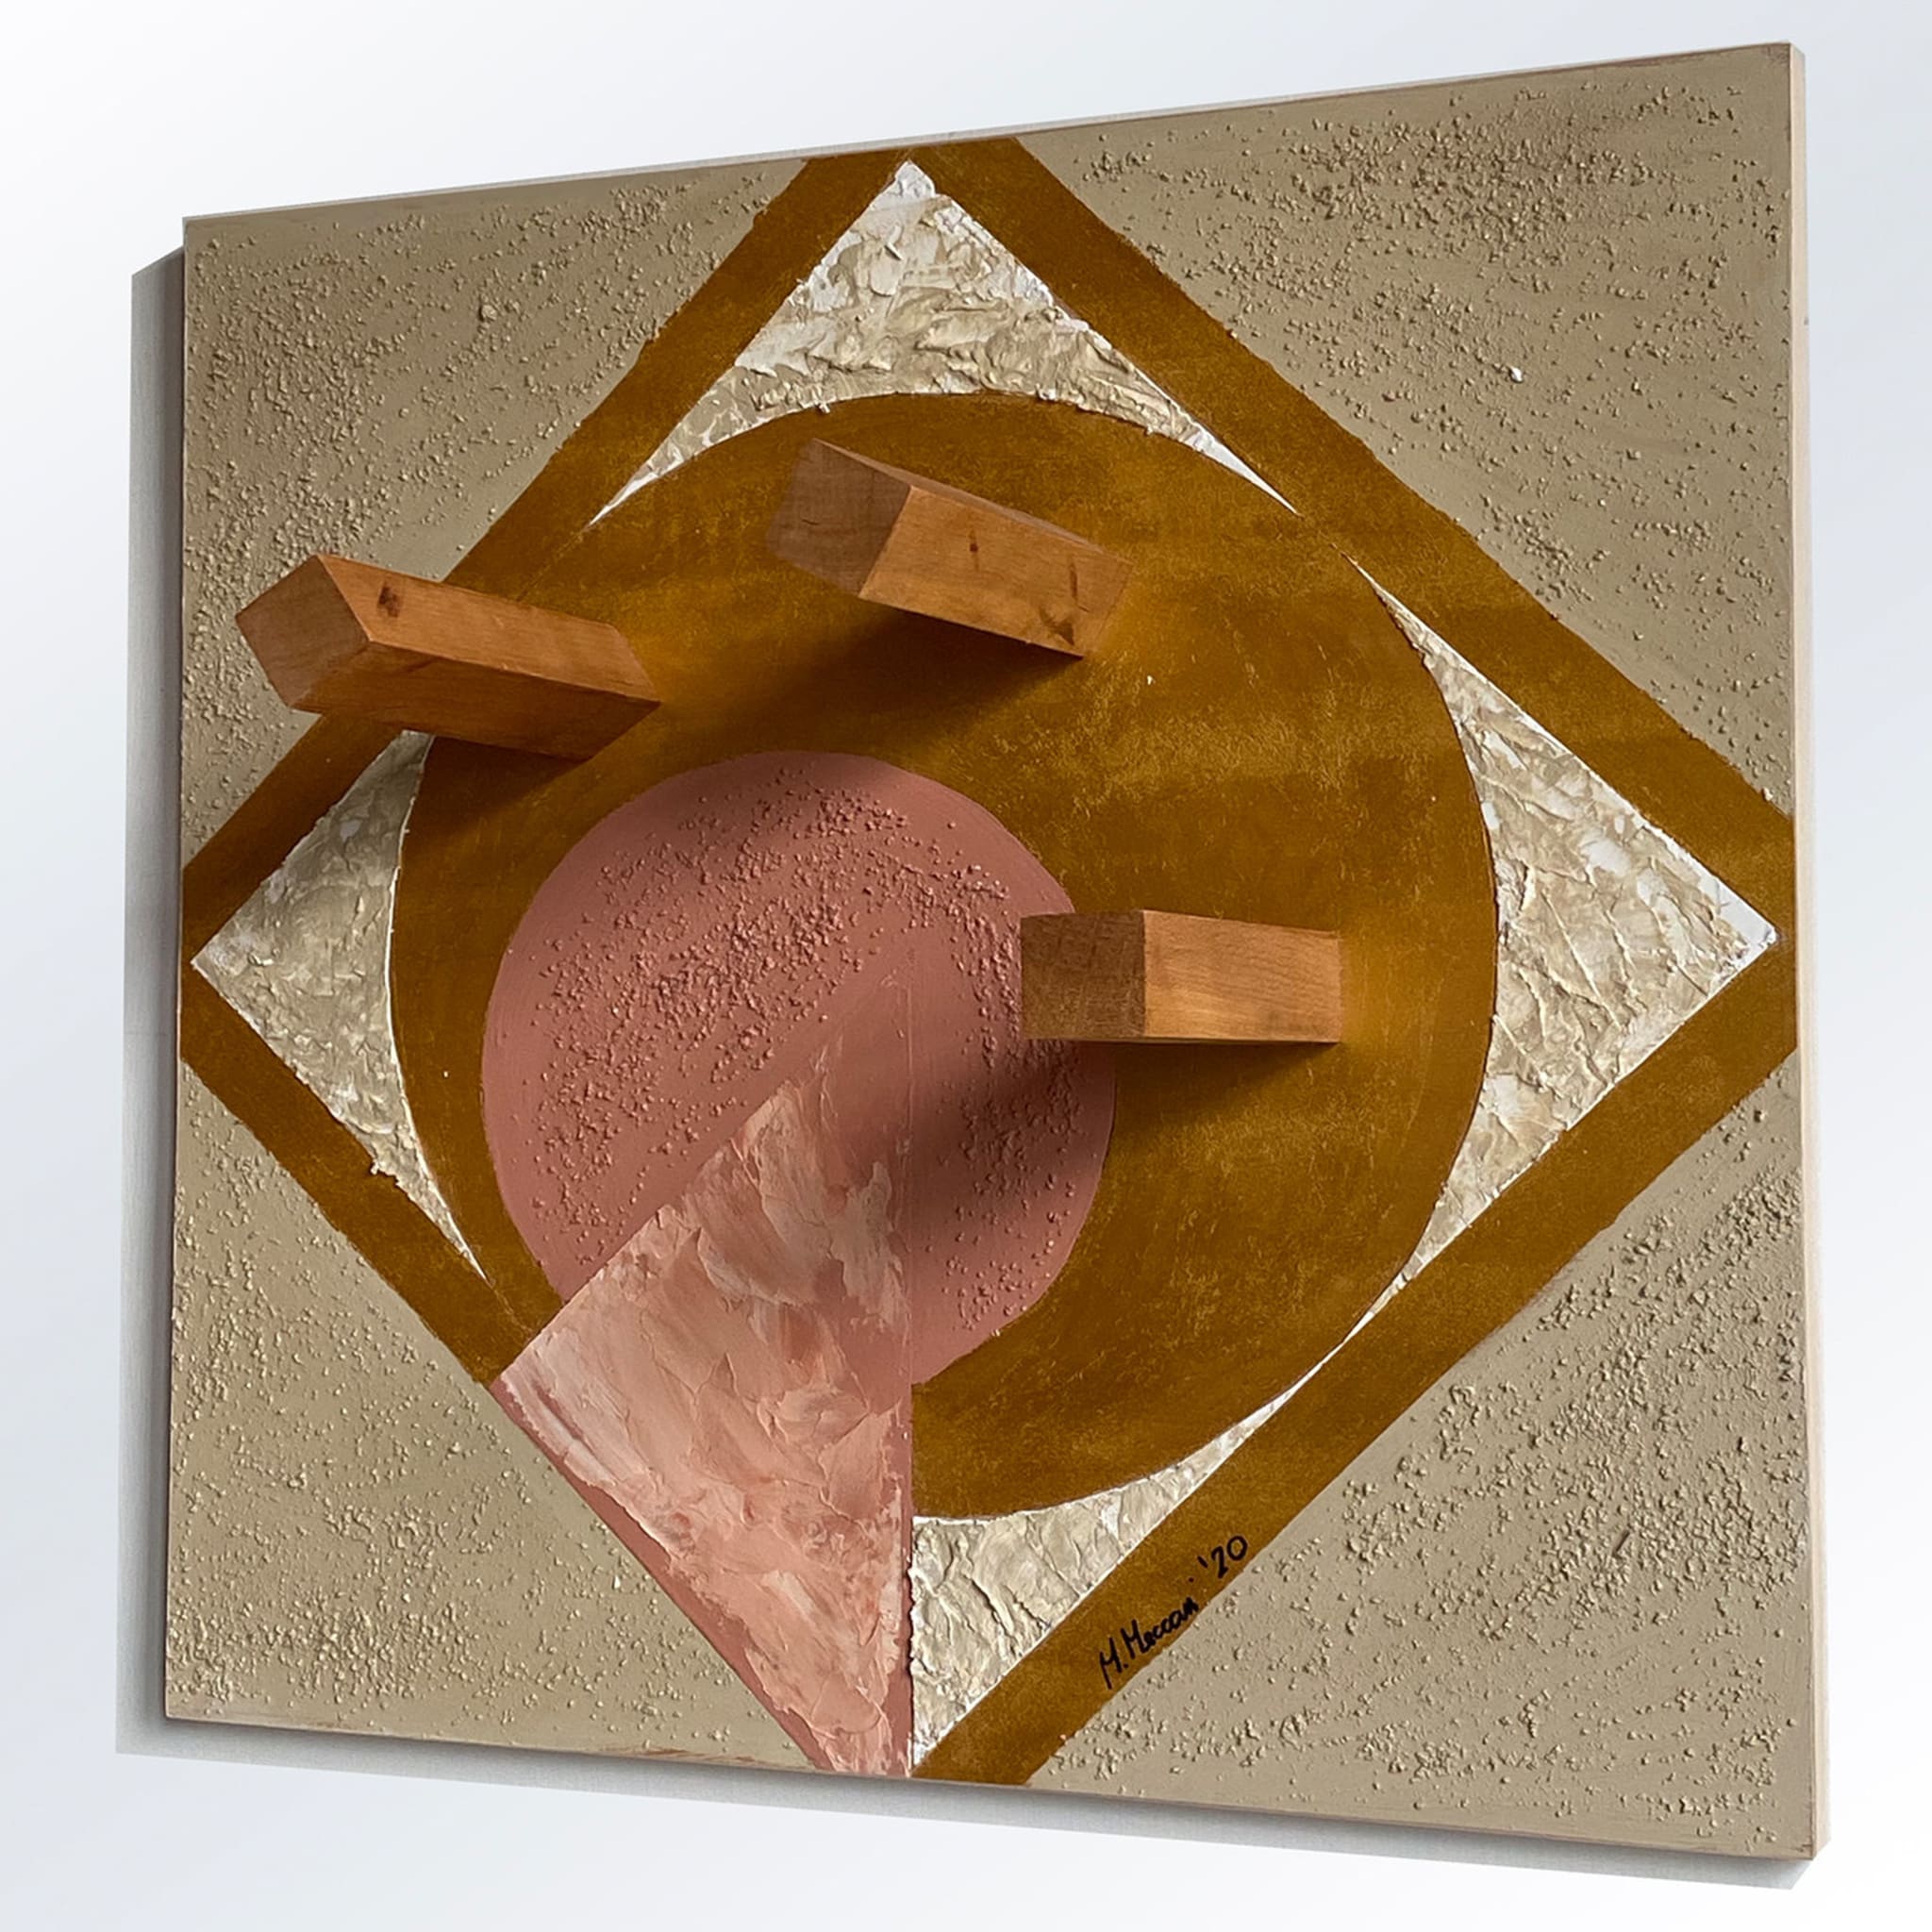 Eclissi Decorative Panel and Wall Hanger by Mascia Meccani - Alternative view 1